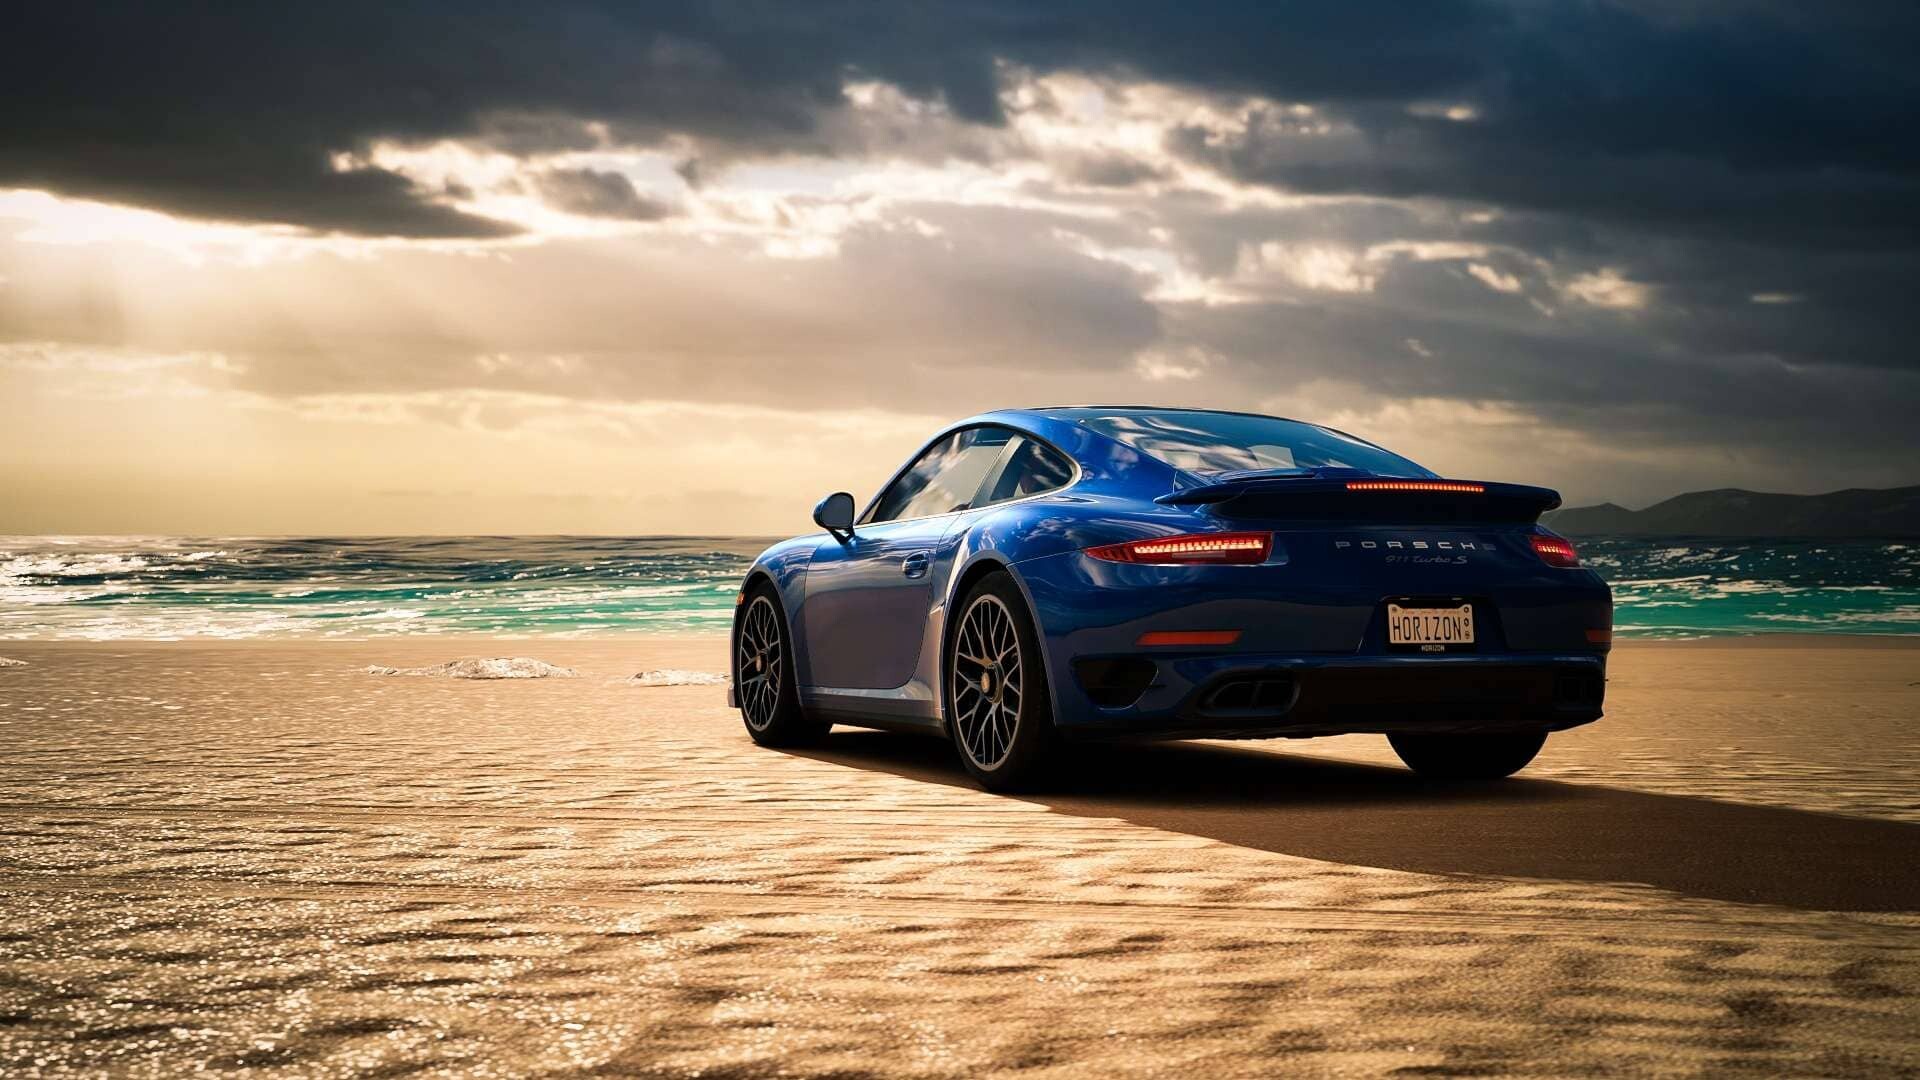 Porsche: The company produces many different models that deliver strong engine performance and offer a variety of unique comfort and convenience features. 1920x1080 Full HD Wallpaper.